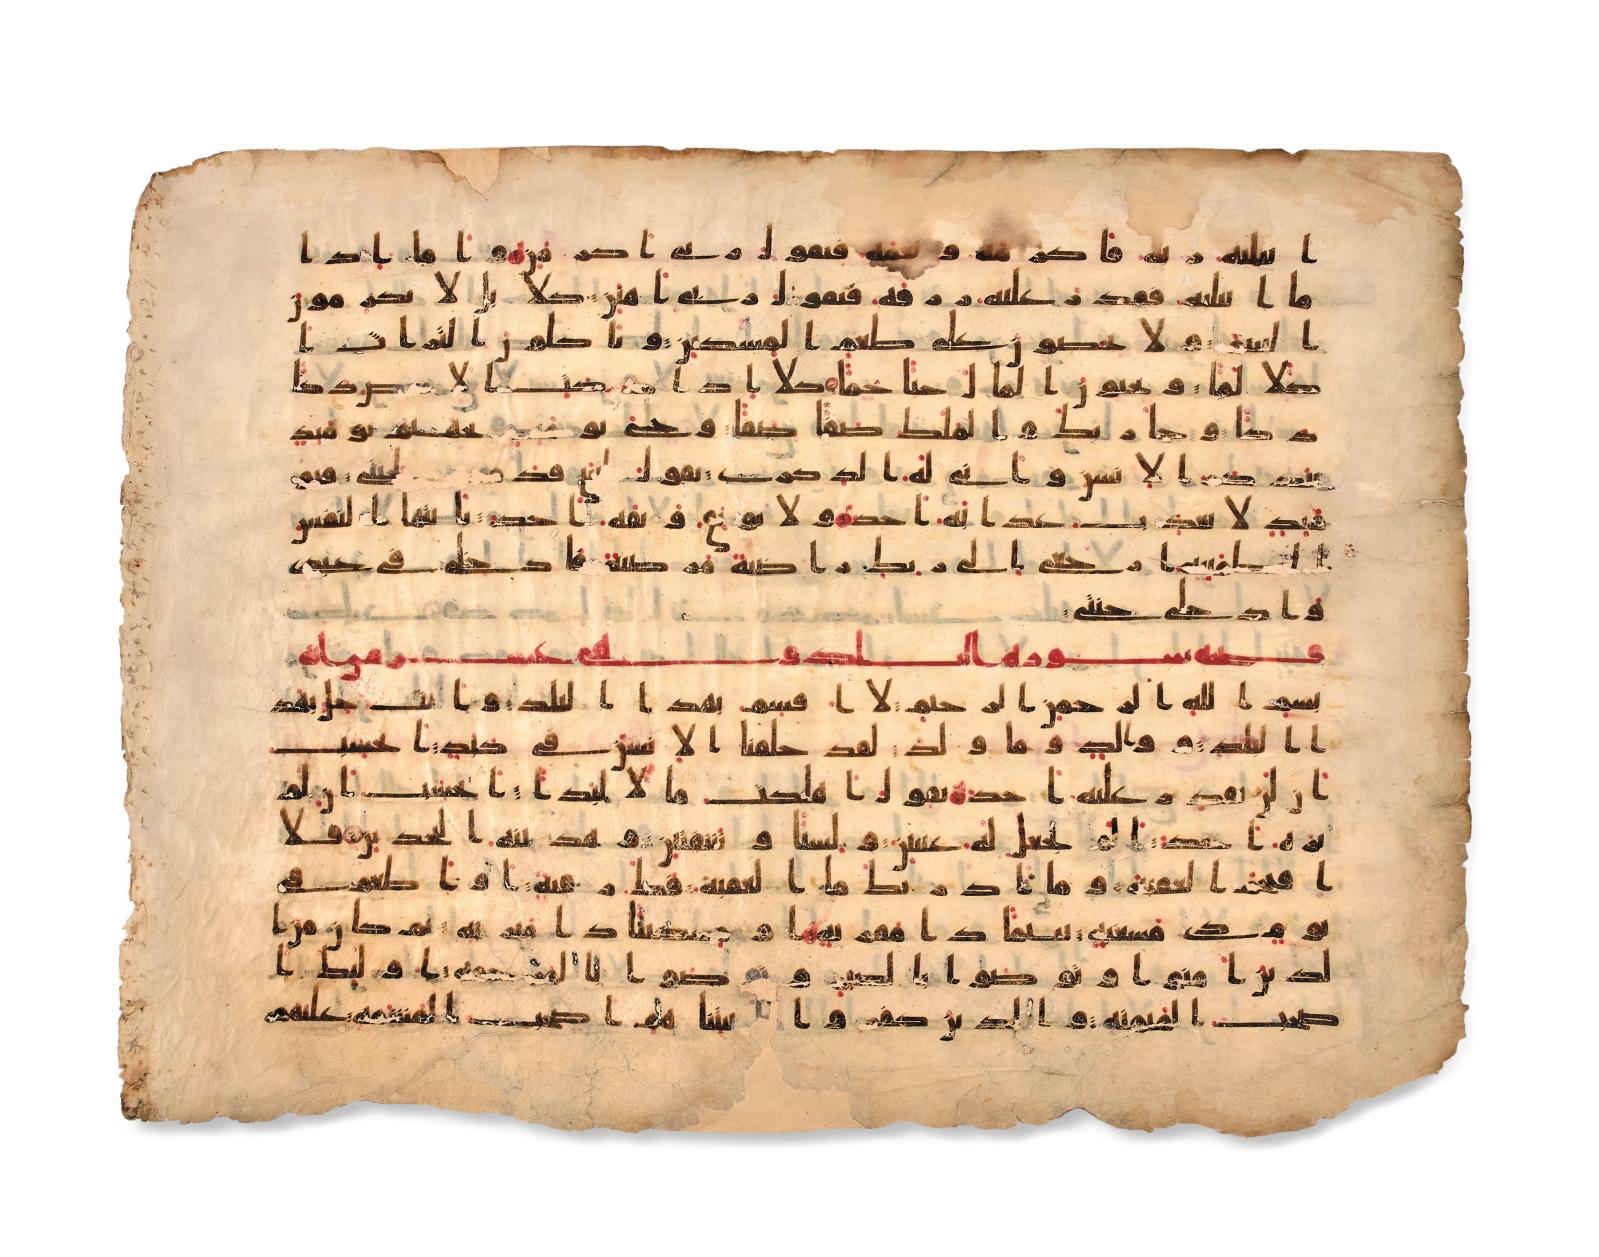 Mesopotamia, late Umayyad period, c. 750, monumental Quran leaf on parchment, sepia ink on parchment, 42.5 x 58.5 cm/16.73 x 23.03 in. Result: €837,545